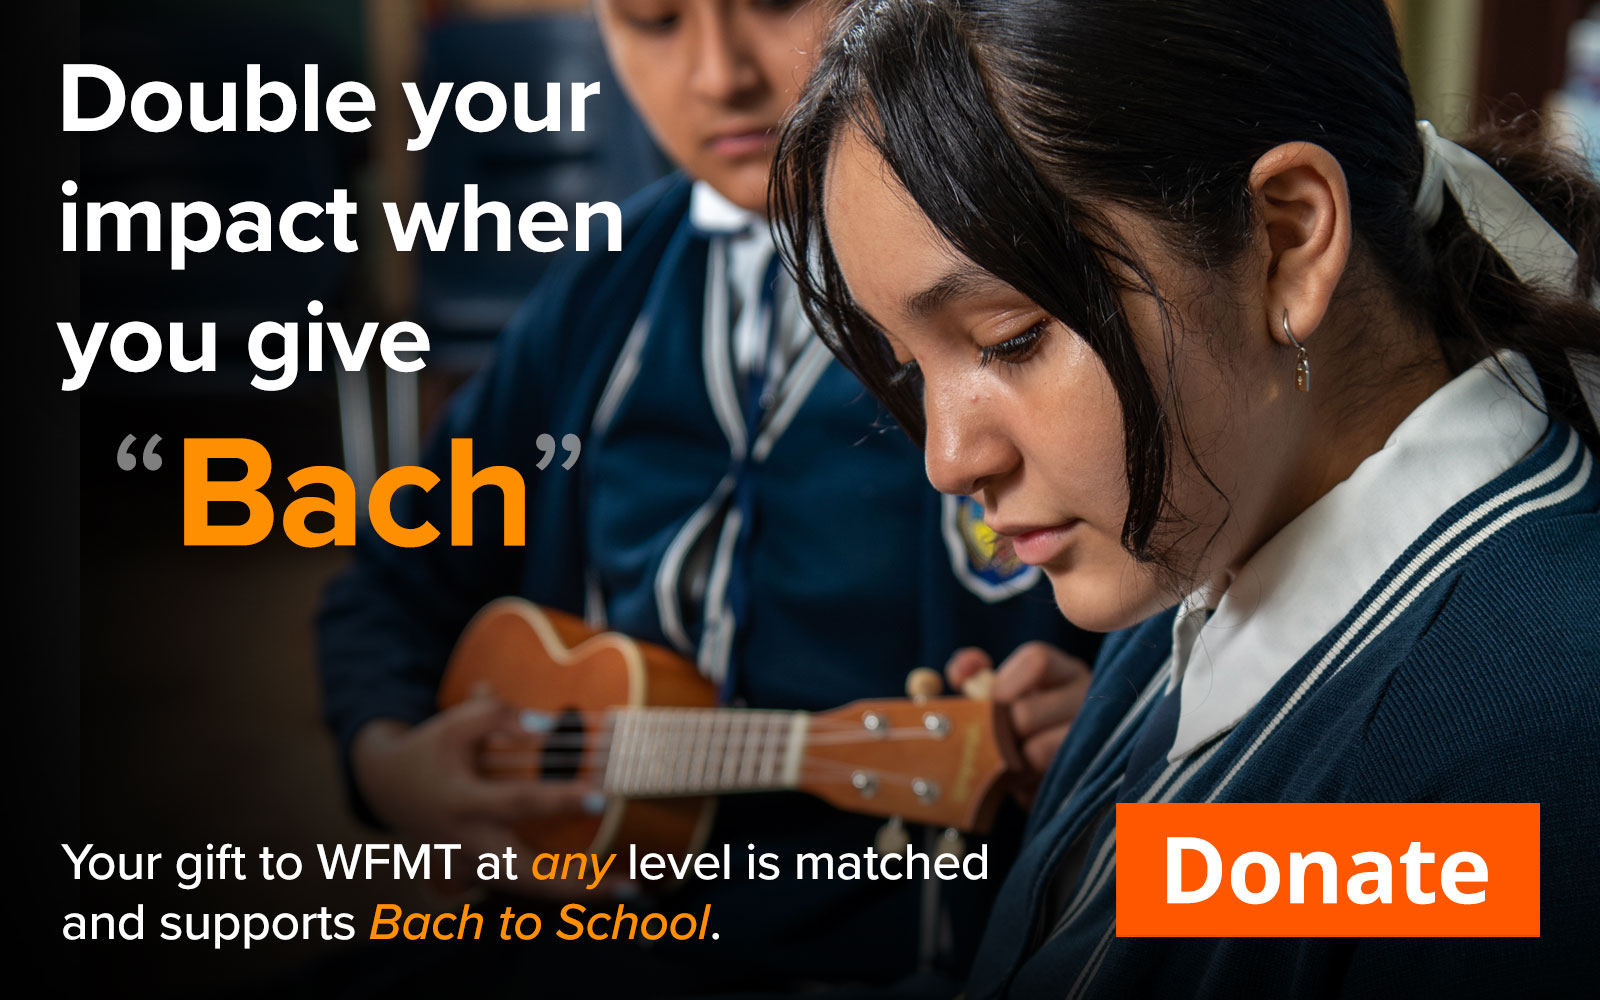 Give Bach - donate to WFMT today!